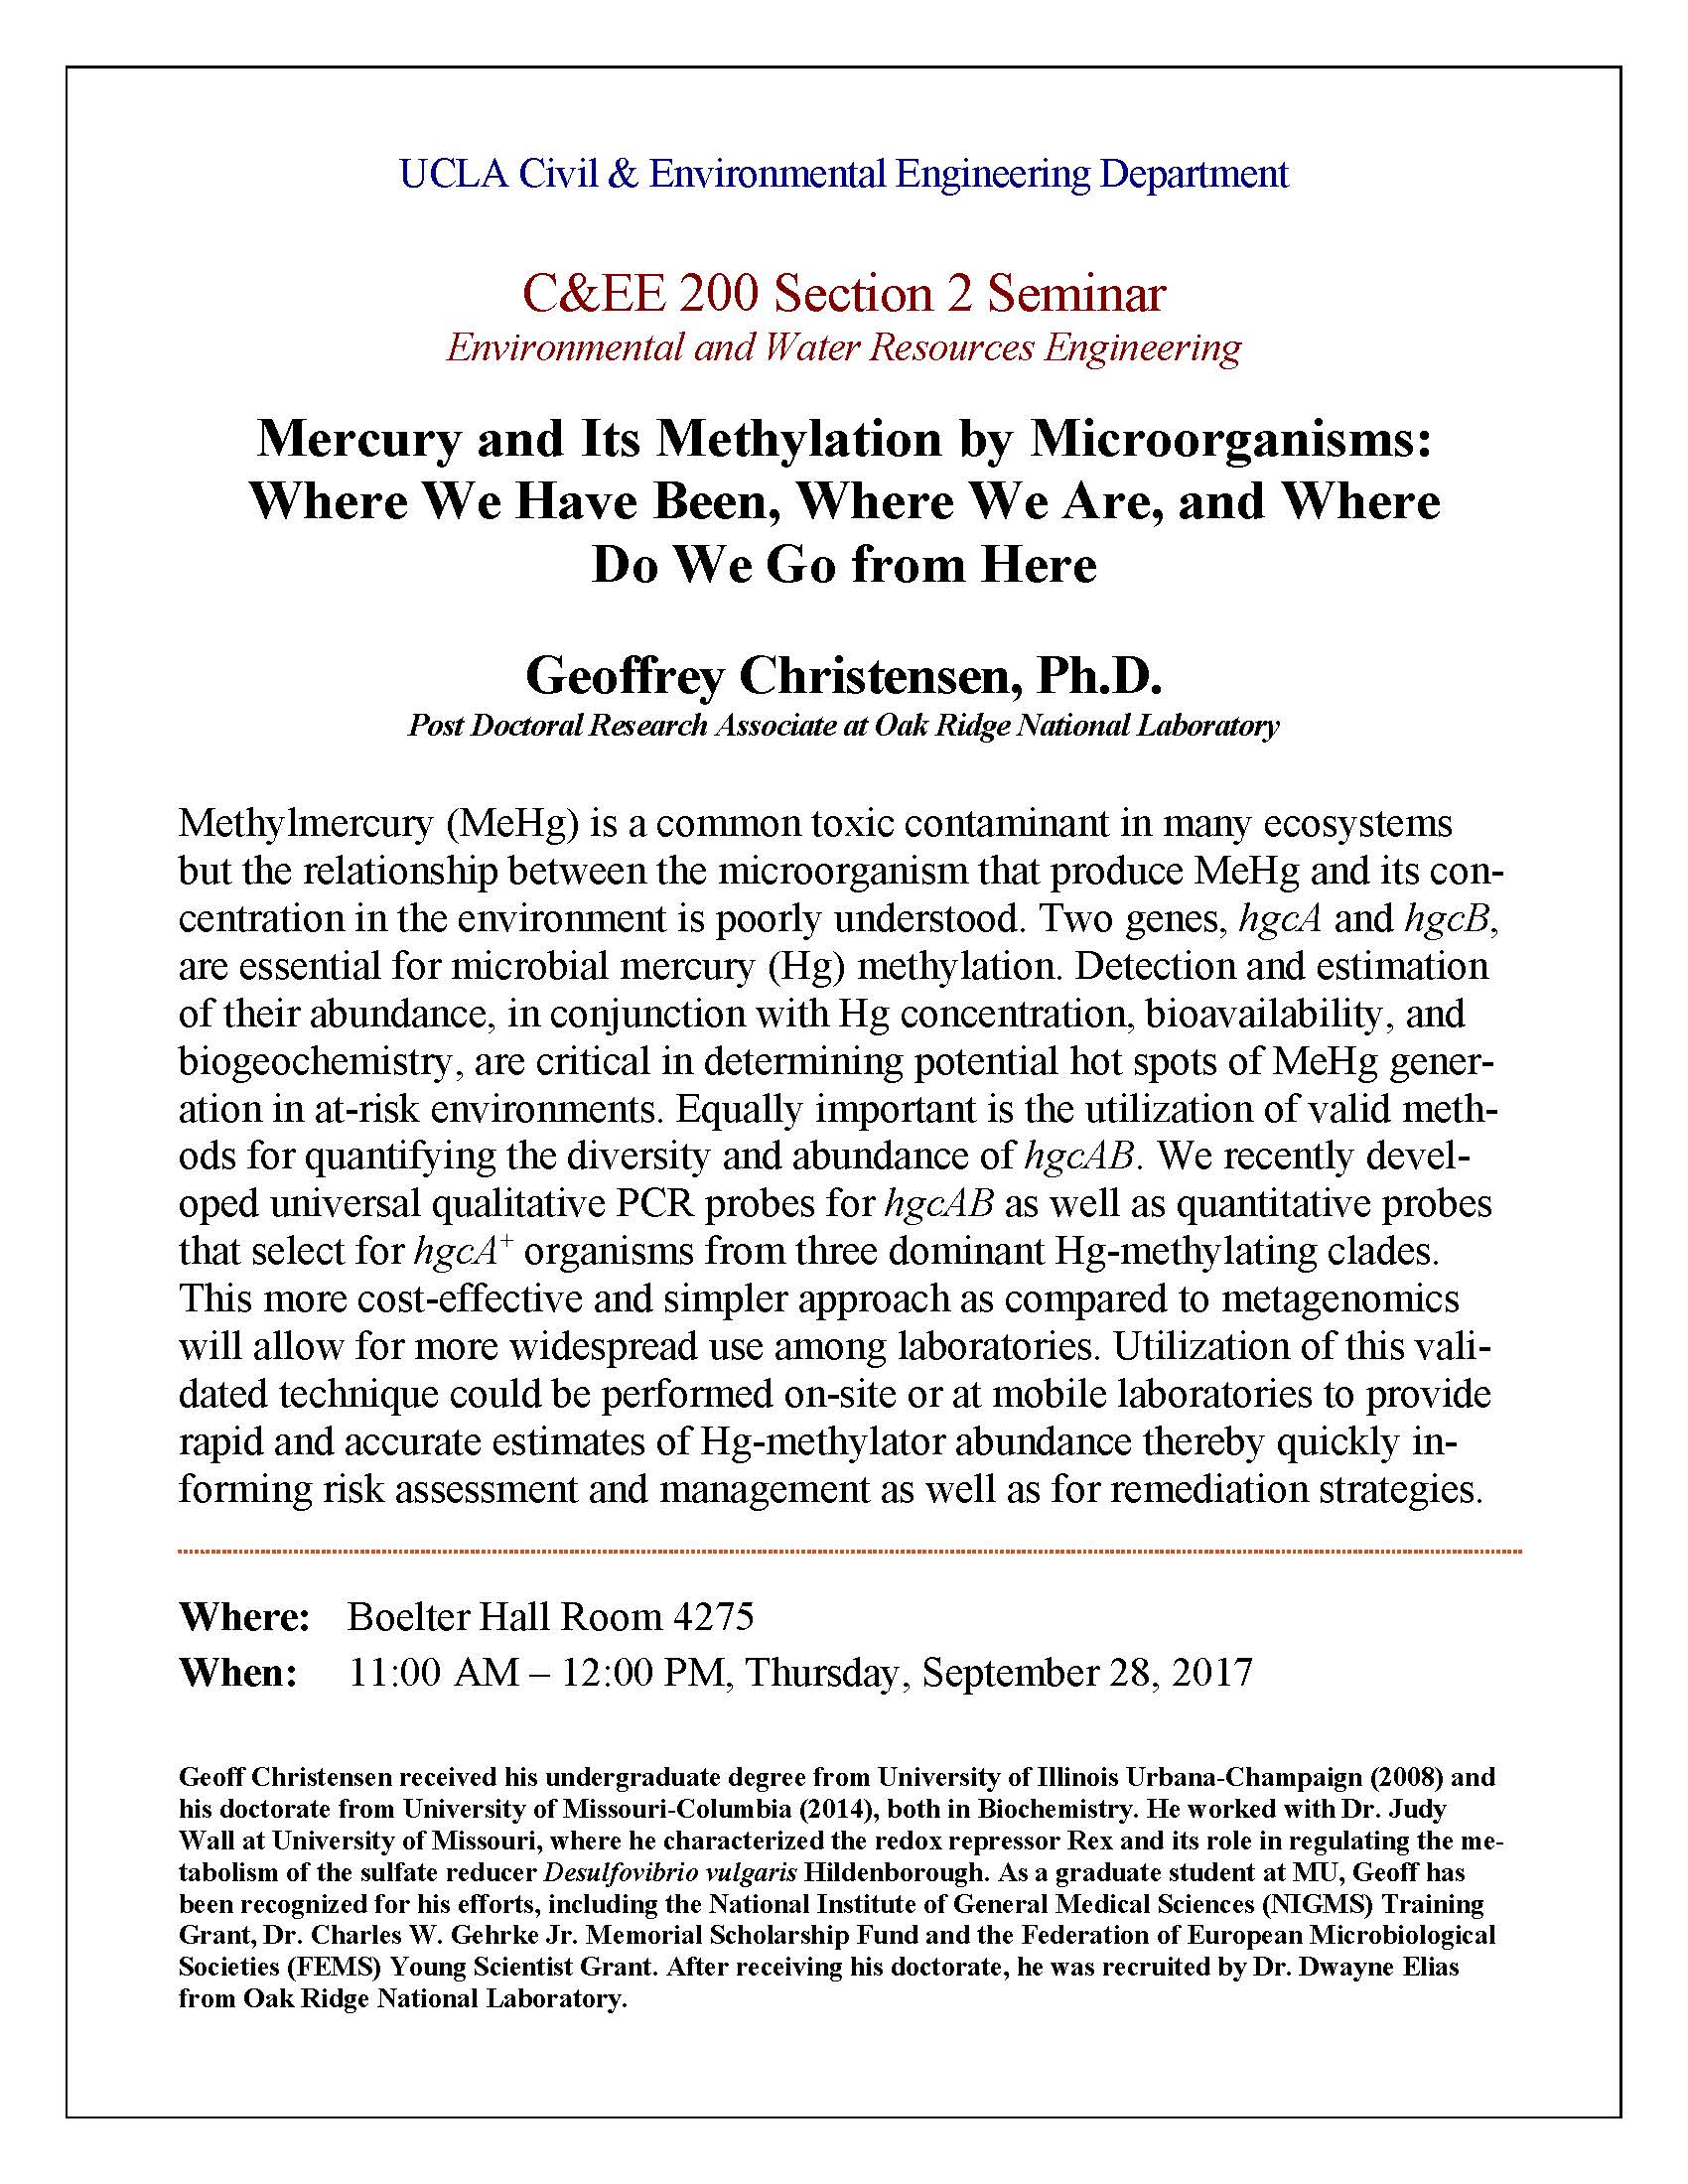 CEE 200 Seminar - Mercury and Its Methylation by Microorganisms: Where We Have Been, Where We Are, and Where Do We Go from Here